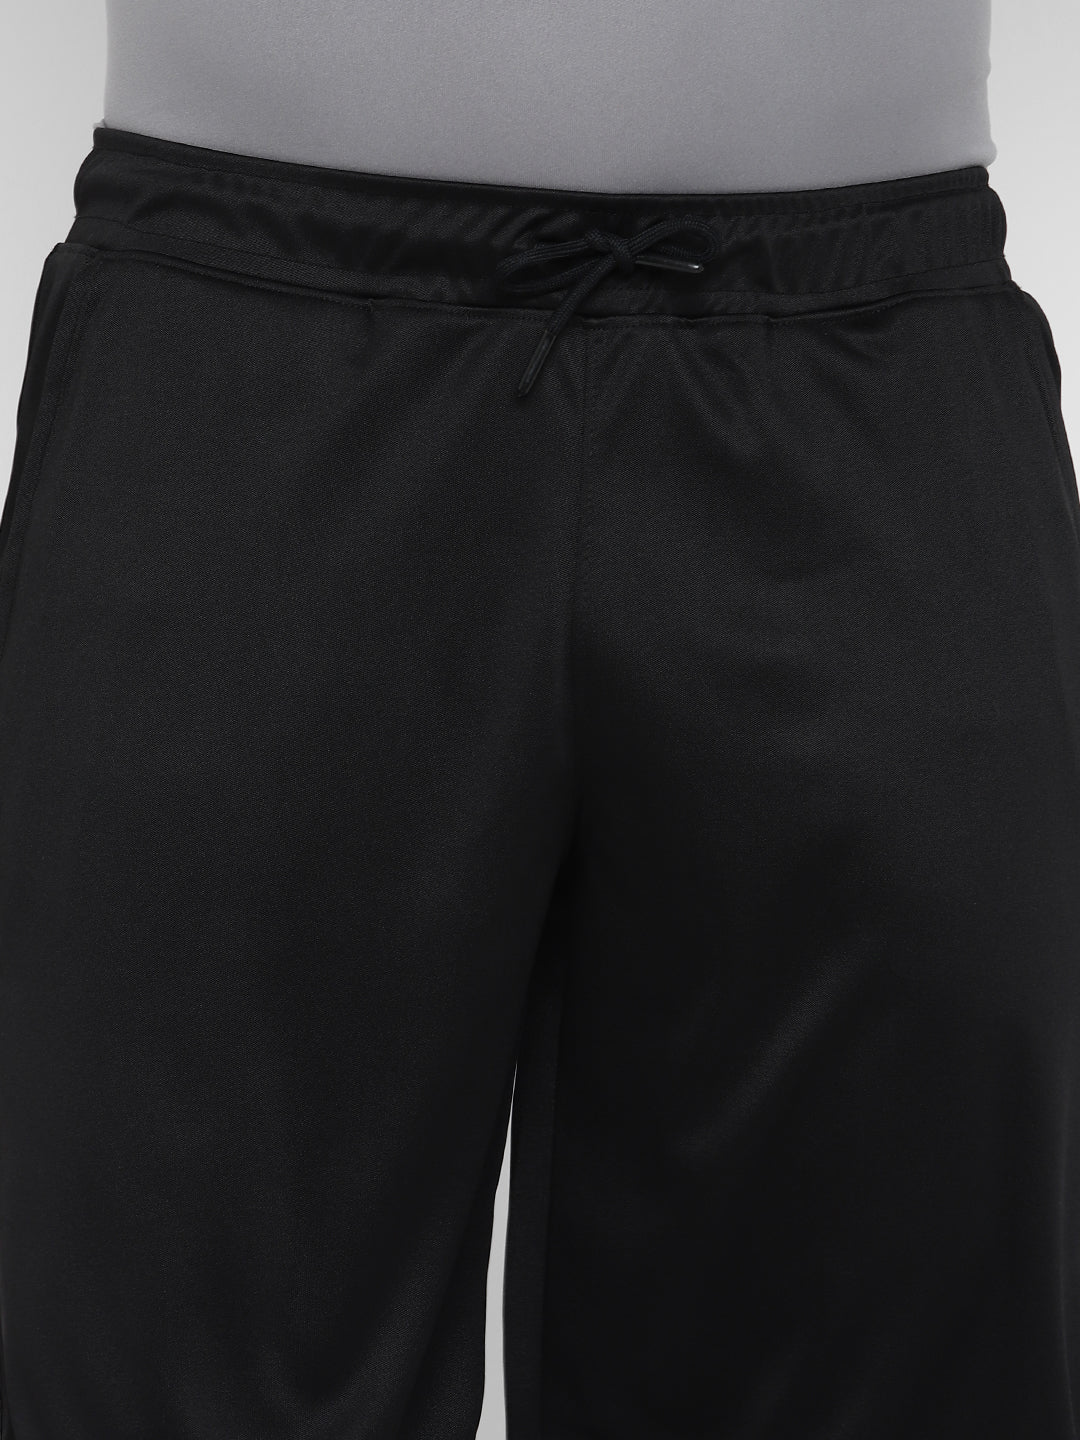 Sports Shorts for Men with Side Pockets - Black